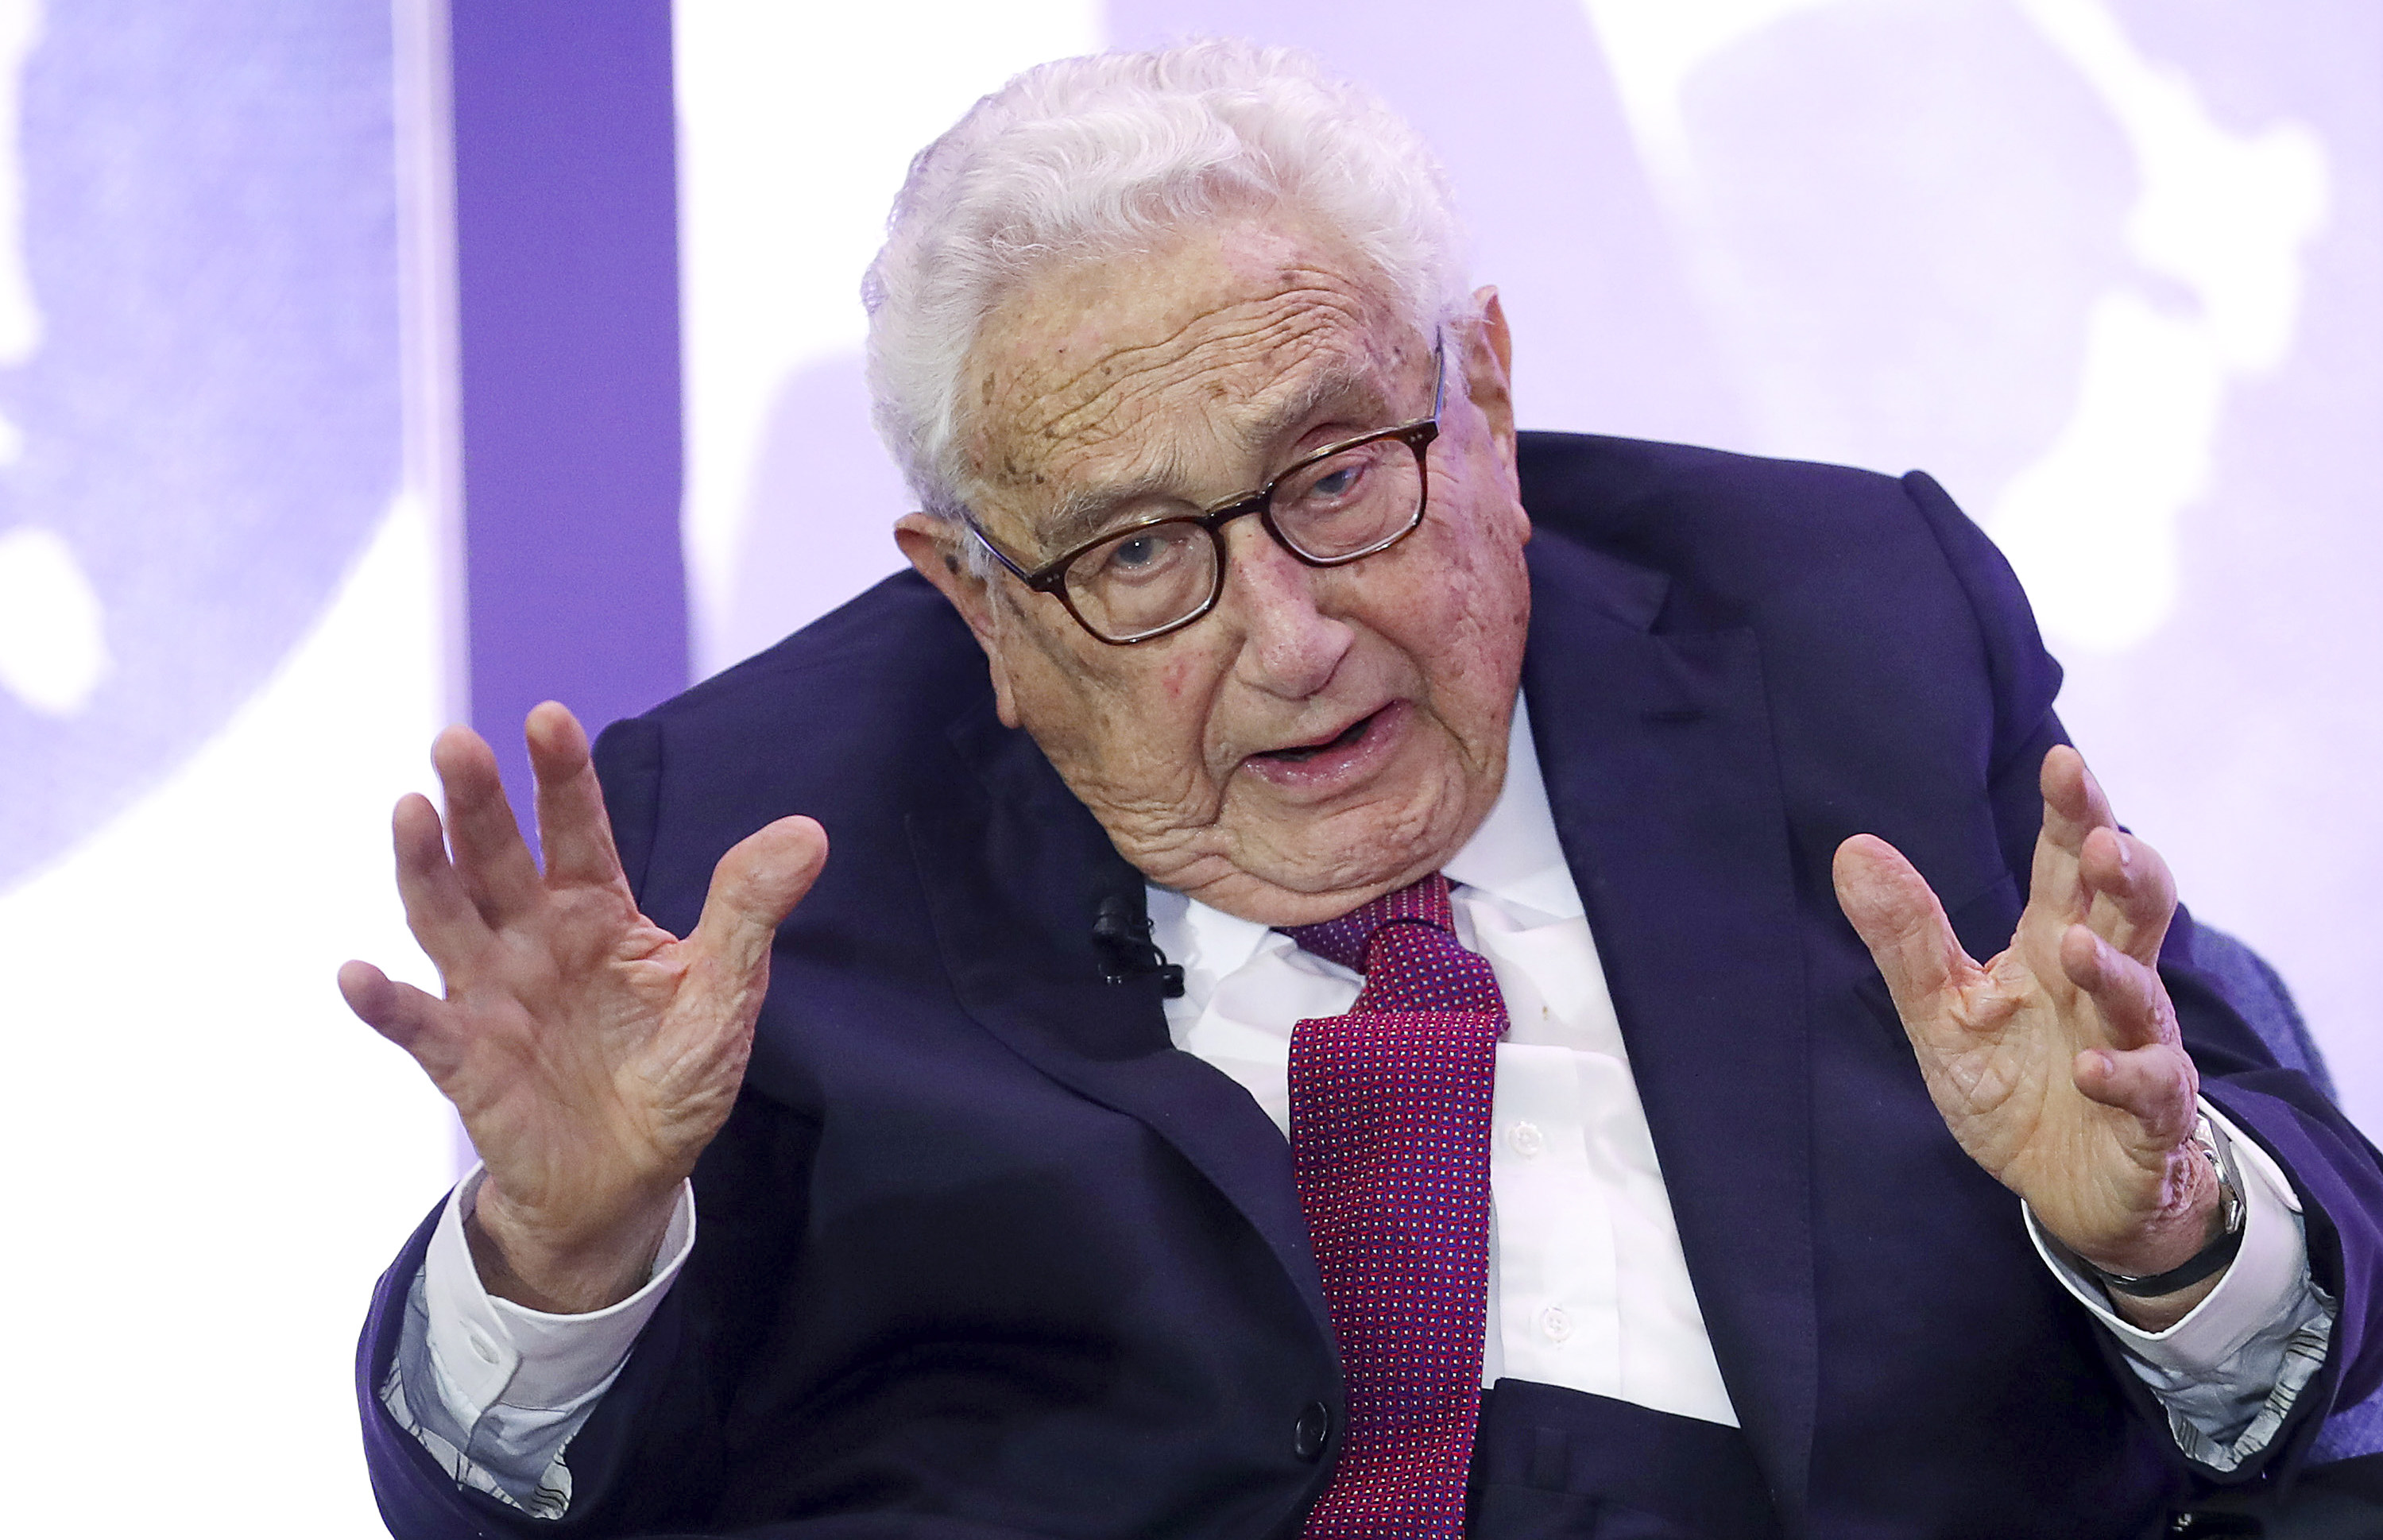 Former US Secretary of State Henry Kissinger in Washington, D.C., July 19, 2019. Photo: Getty Images